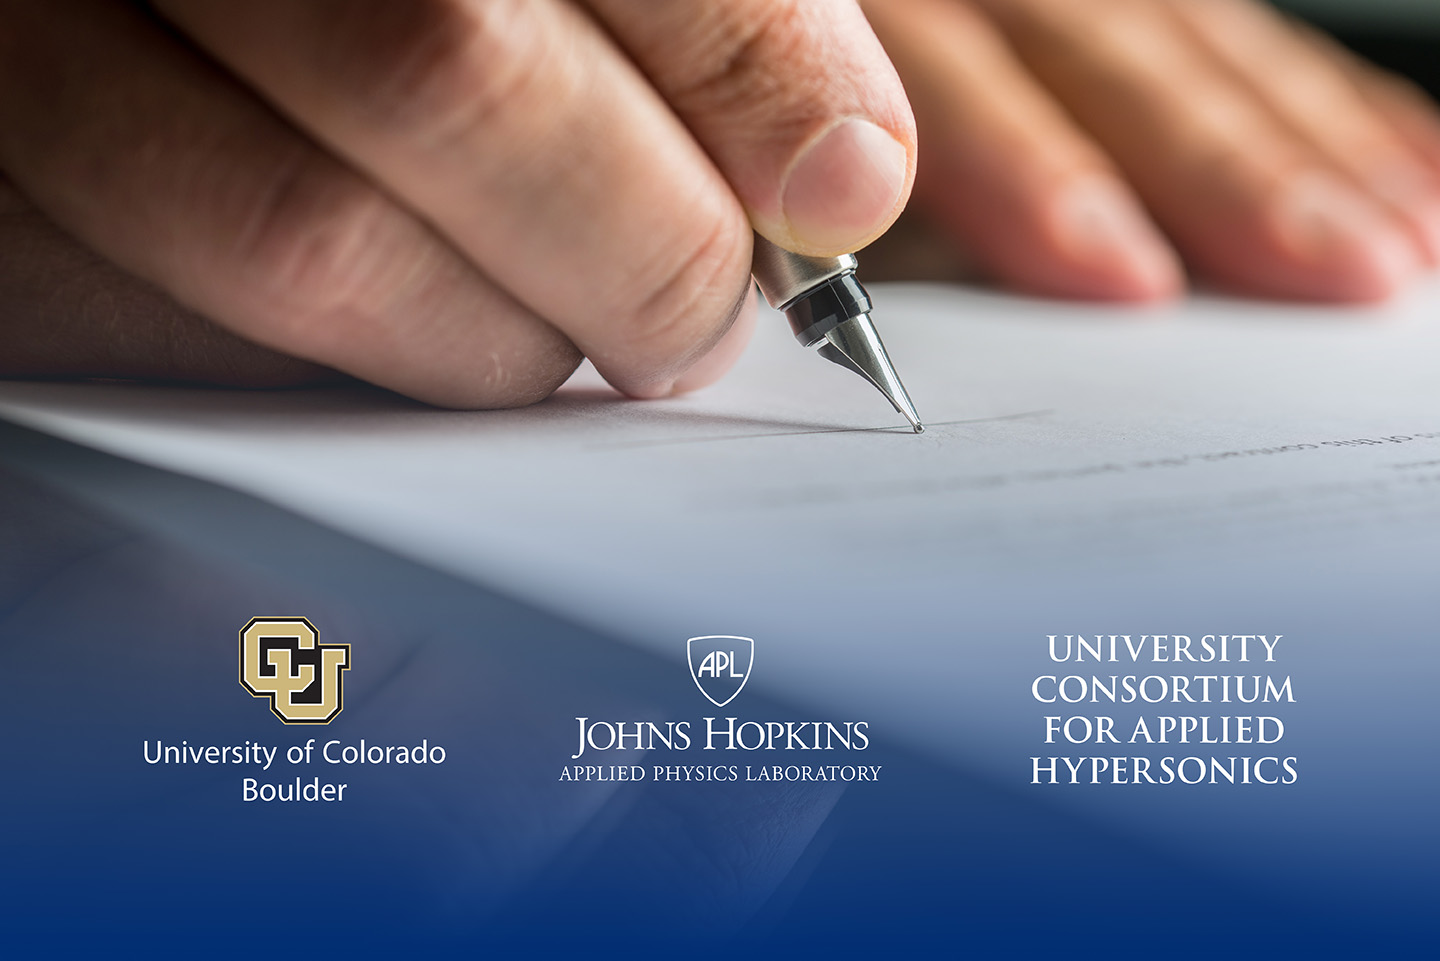 Logos for Johns Hopkins APL, CU Boulder, and the University Consortium for Applied Hypersonics overlaid on an image of a person signing a paper.